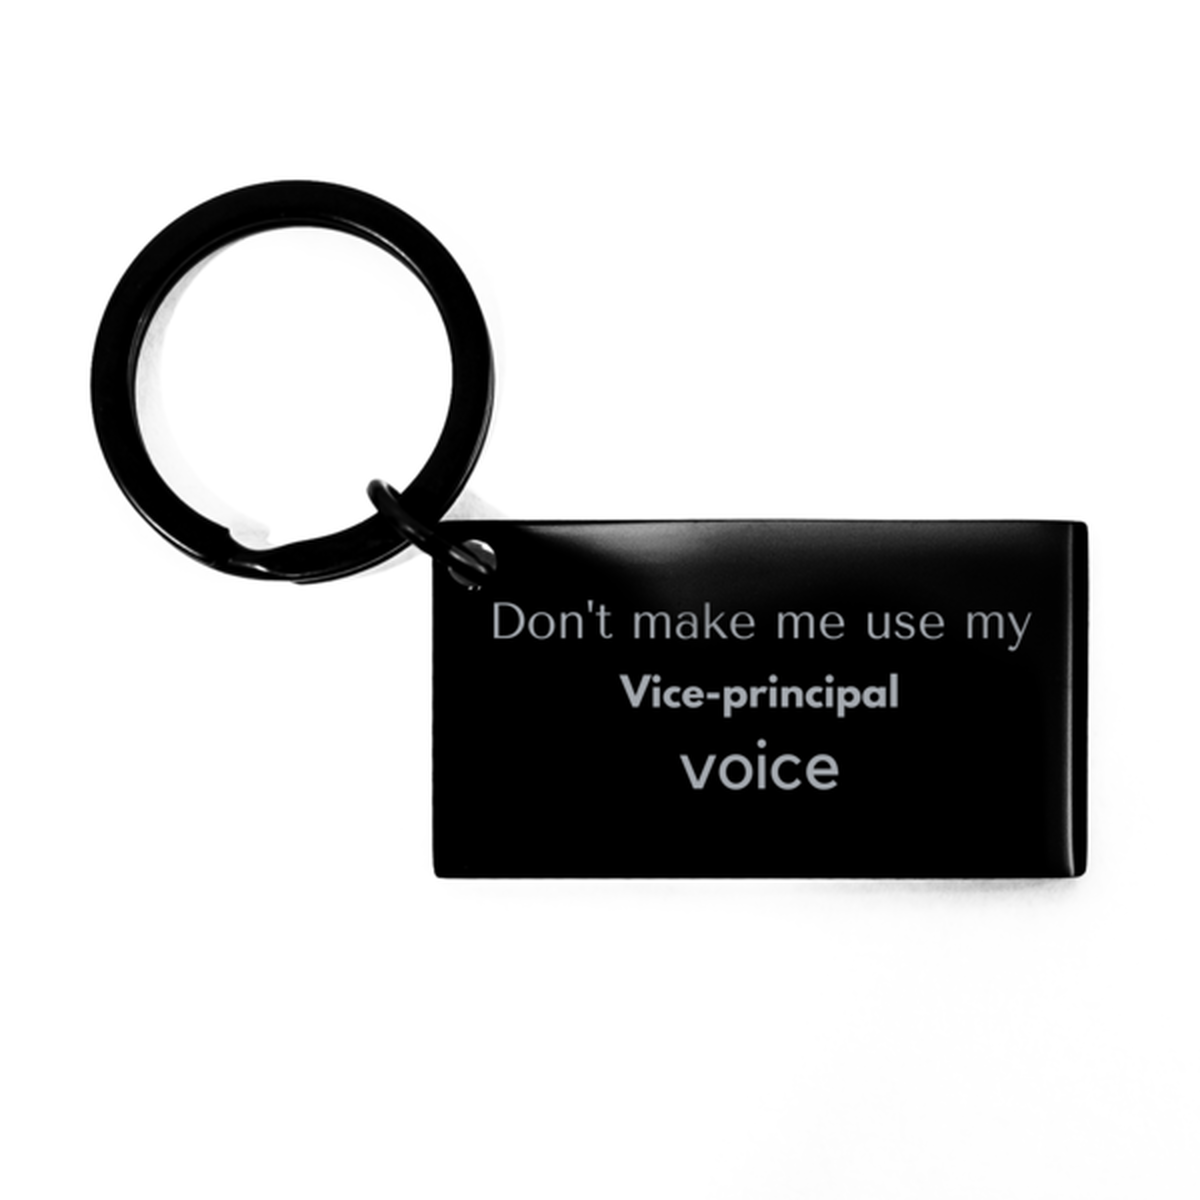 Don't make me use my Vice-principal voice, Sarcasm Vice-principal Gifts, Christmas Vice-principal Keychain Birthday Unique Gifts For Vice-principal Coworkers, Men, Women, Colleague, Friends